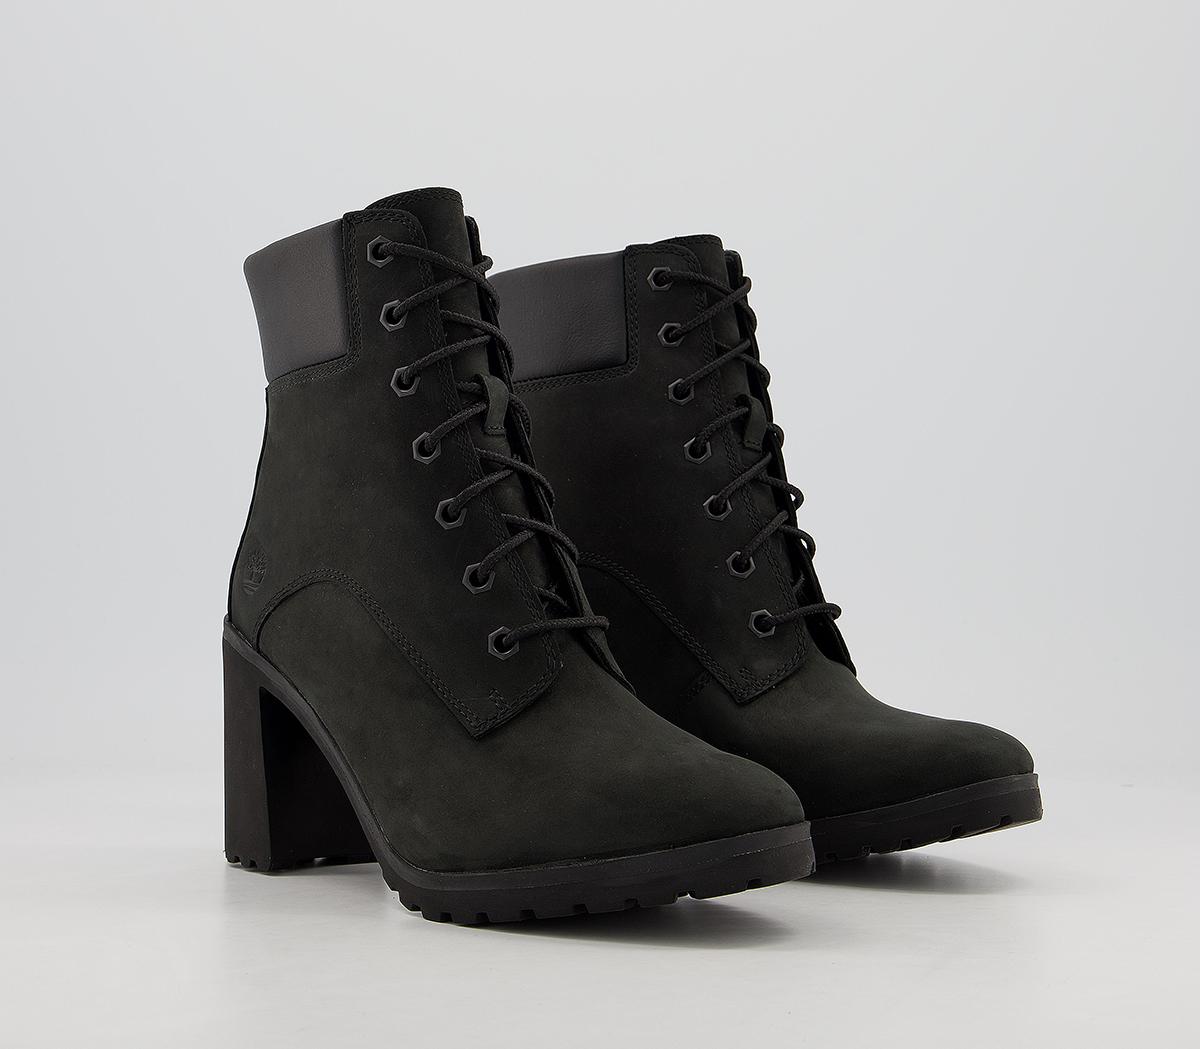 Timberland Allington 6 Inch Lace Boots Black - Women's Ankle Boots